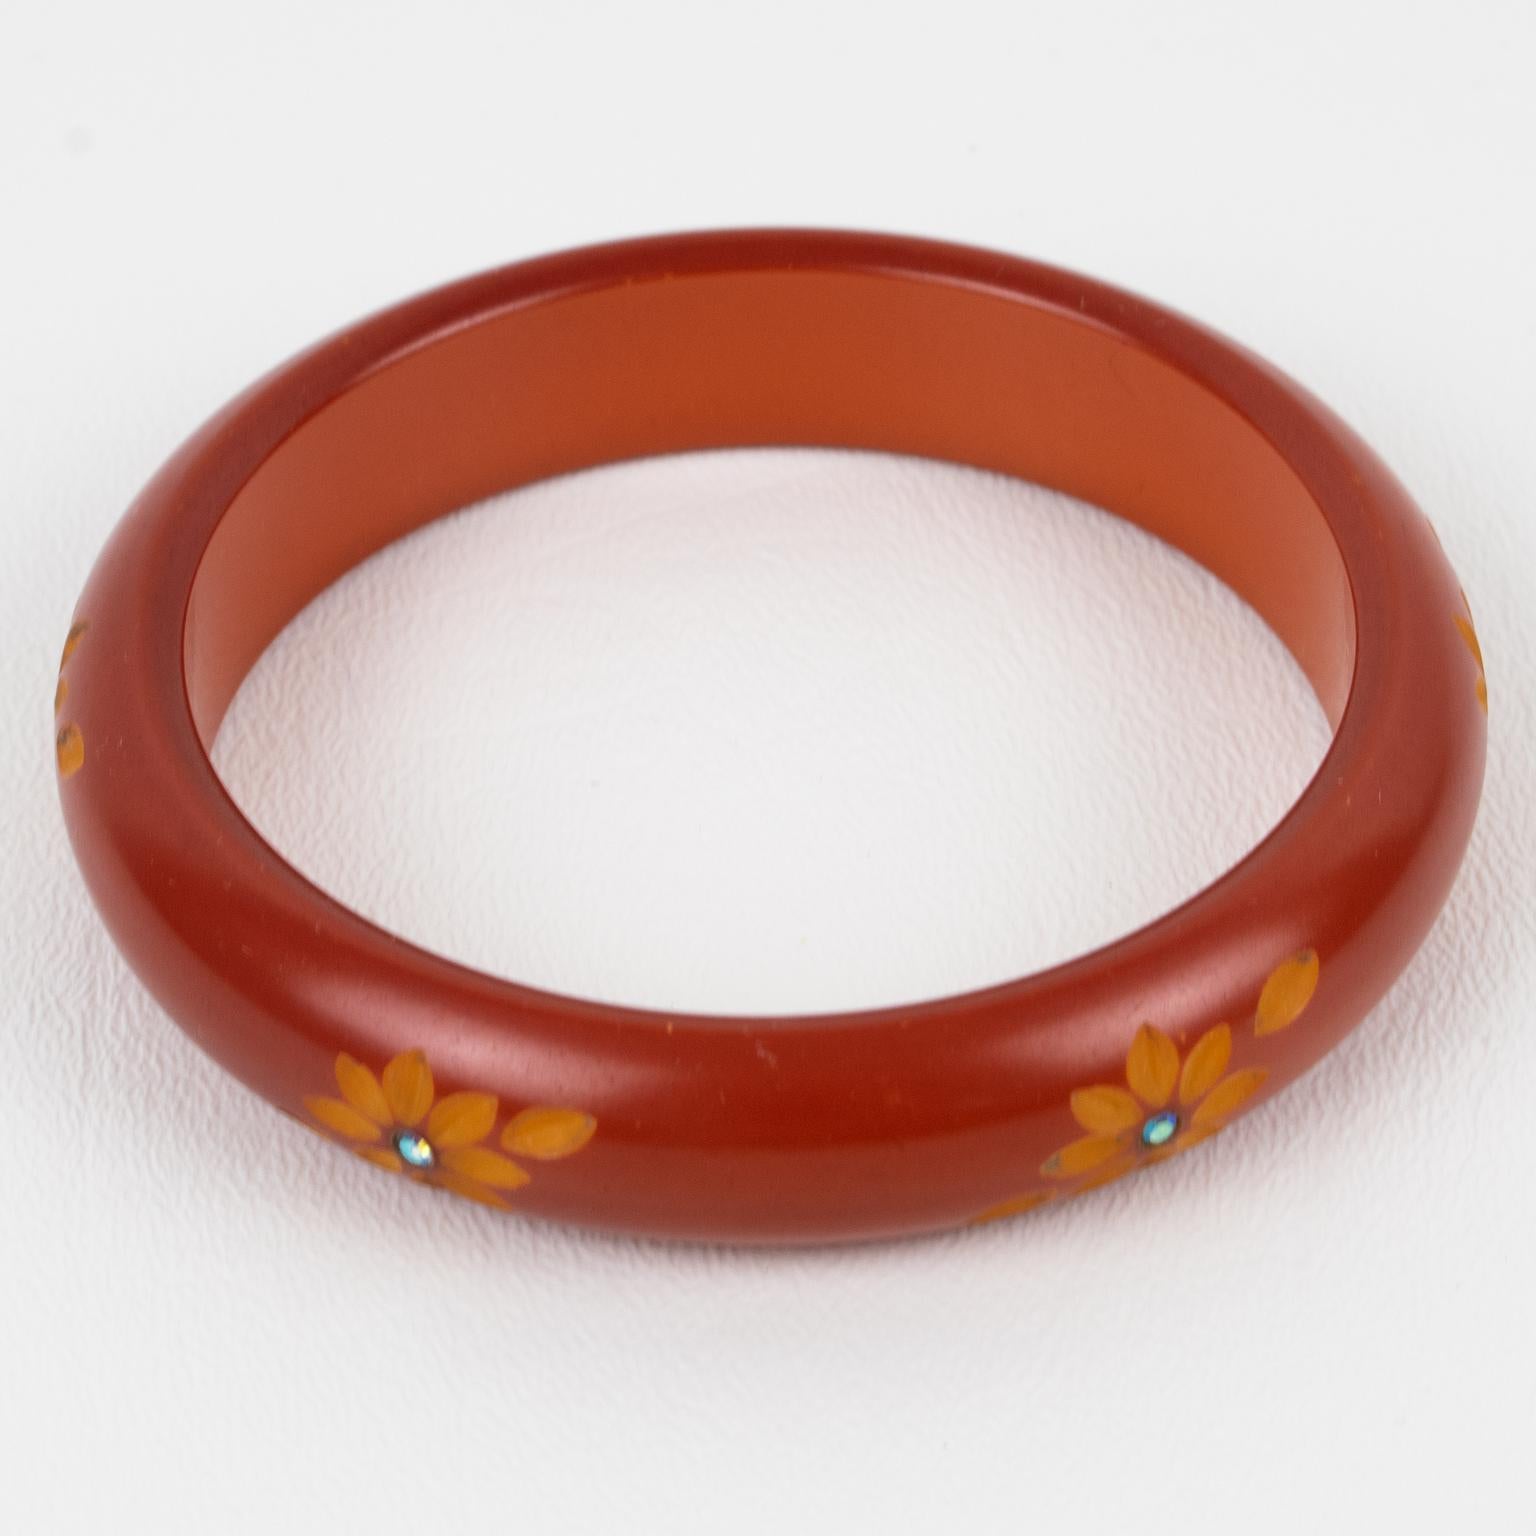 A stunning Art Deco Bakelite carved bracelet bangle. The chunky domed shape has deep floral carvings around it and is embellished with tiny crystal AB rhinestones. The piece boasts an intense red-rust color with glitter contrast.
Measurements: